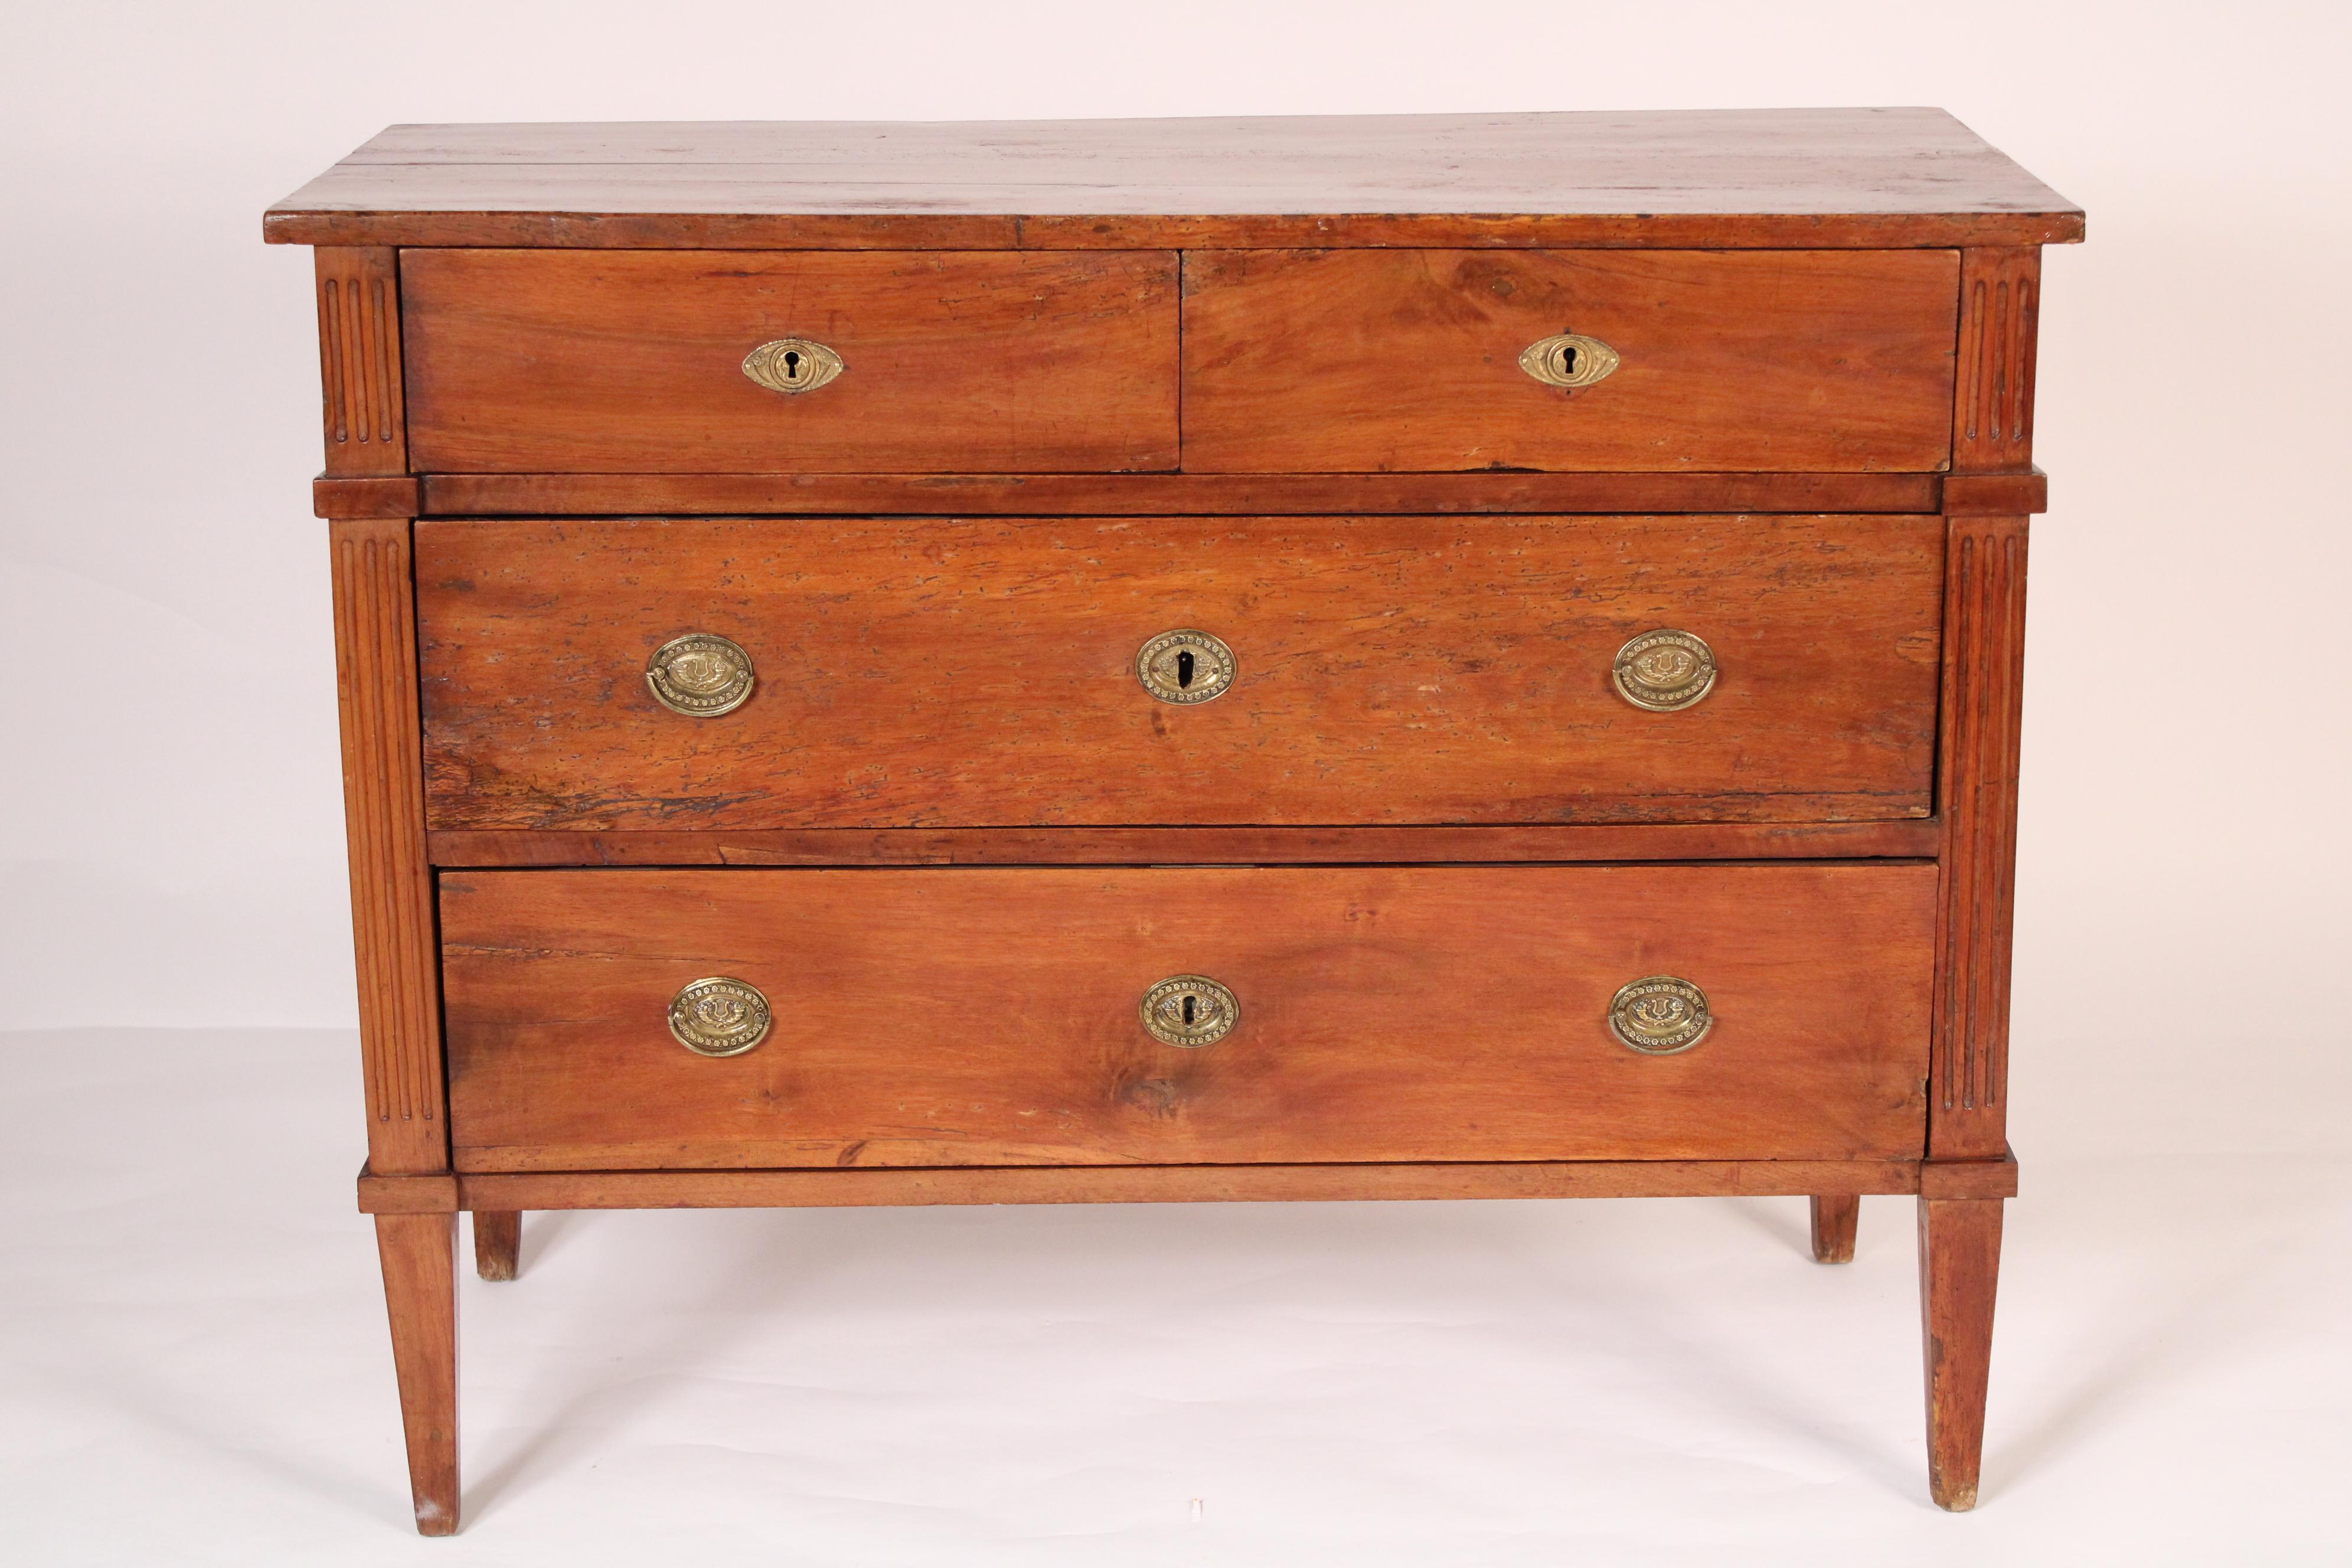 Antique Louis XVI style walnut chest of drawers, 19th century. With a 3 board rectangular top, two top drawers and two lower drawers flanked by fluted stiles, resting on square tapered legs. Nice color. Hand dovetailed drawer construction.